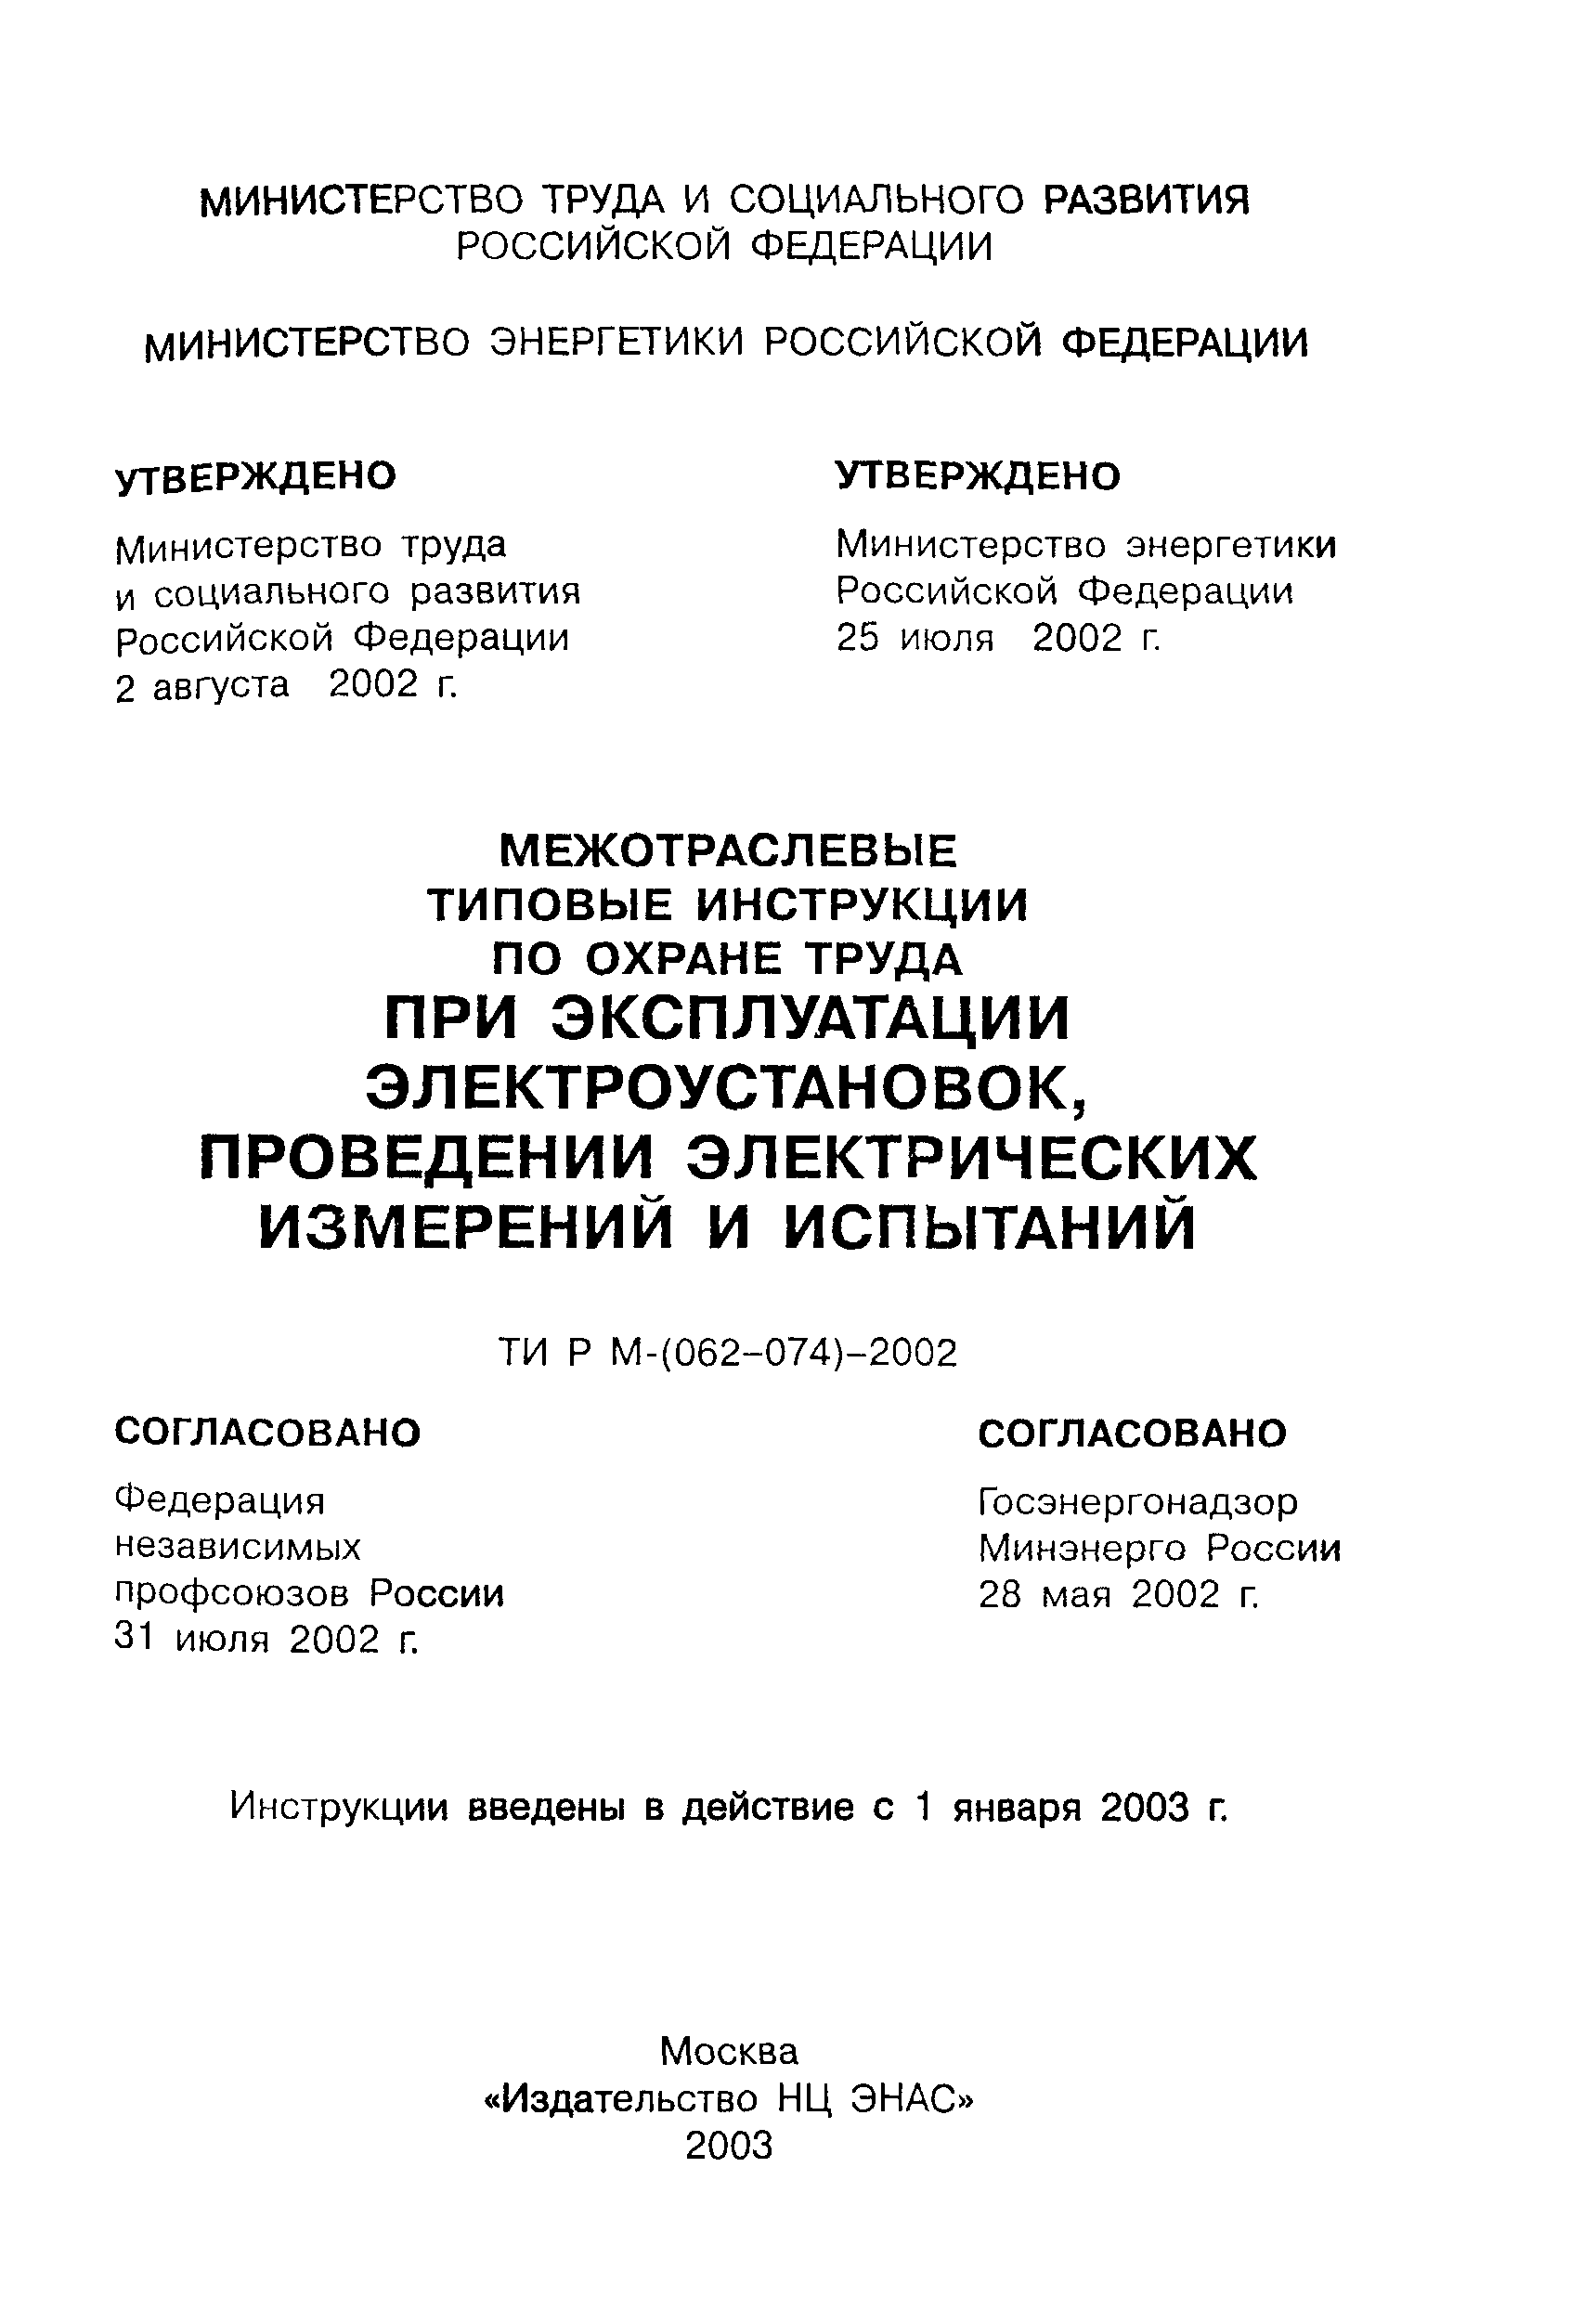 ТИ Р М-066-2002